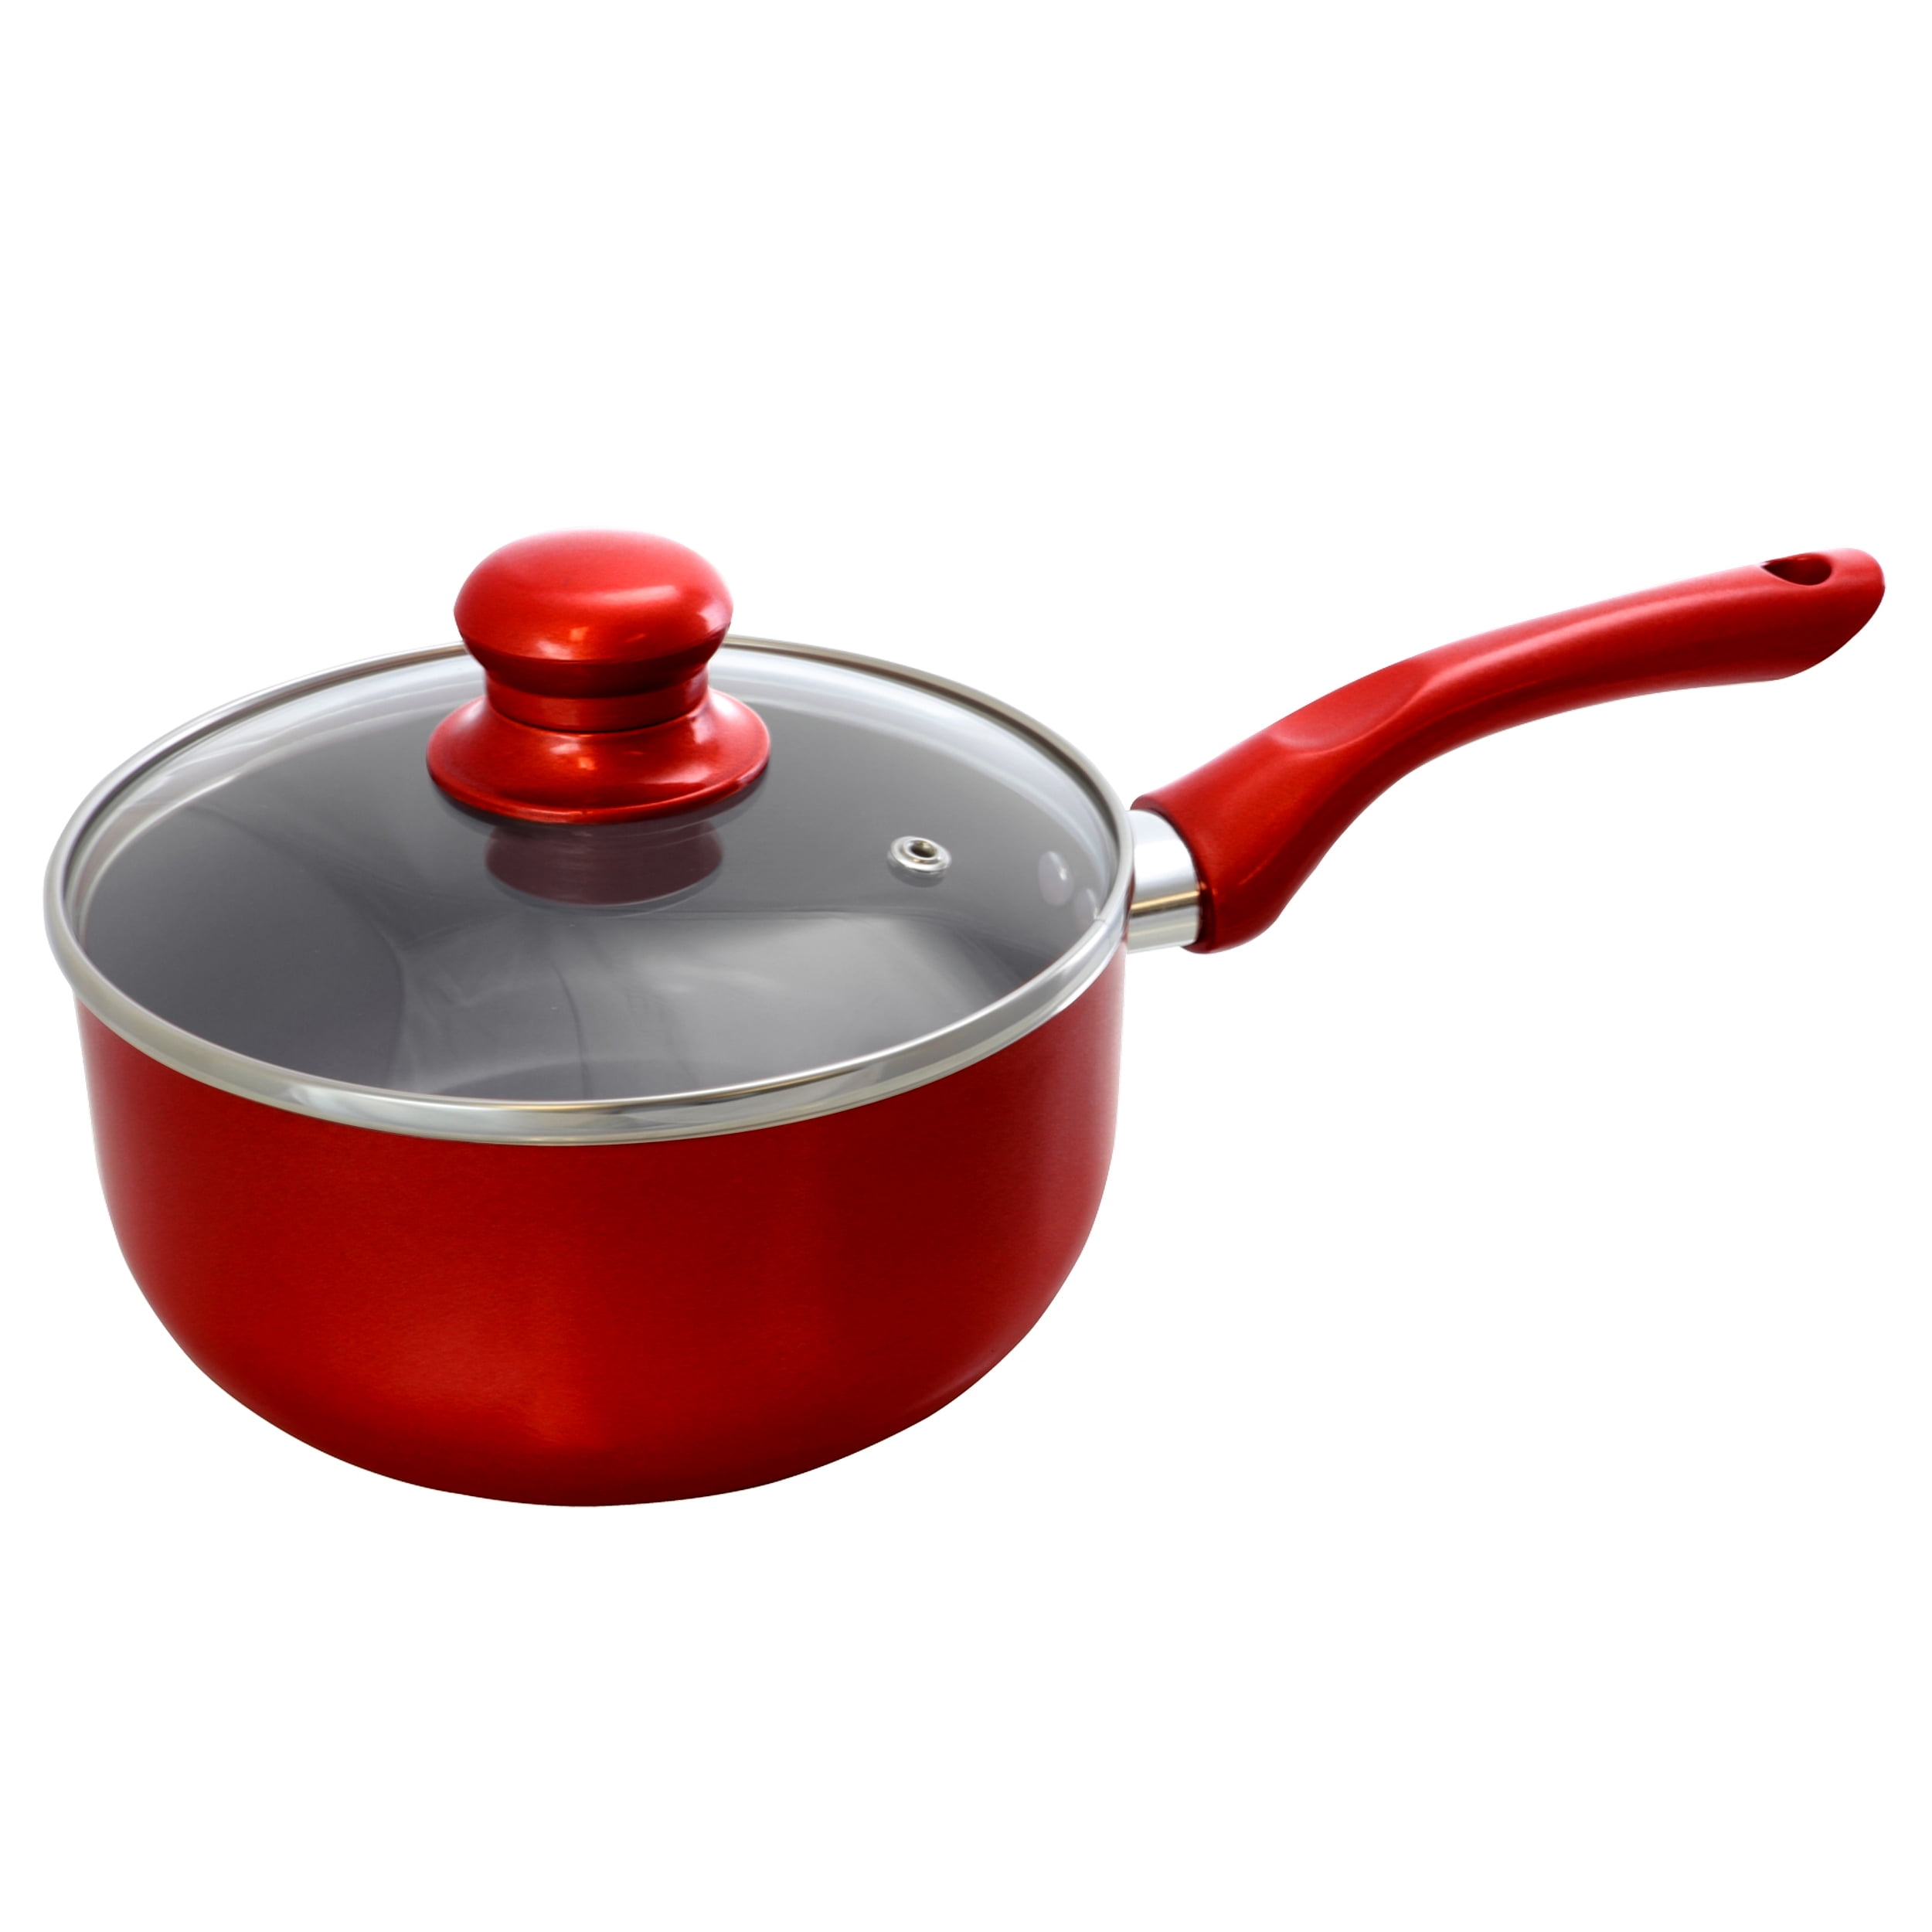 Better Chef 1.5 Quart Ceramic Coated Saucepan in Red with Glass Lid ...